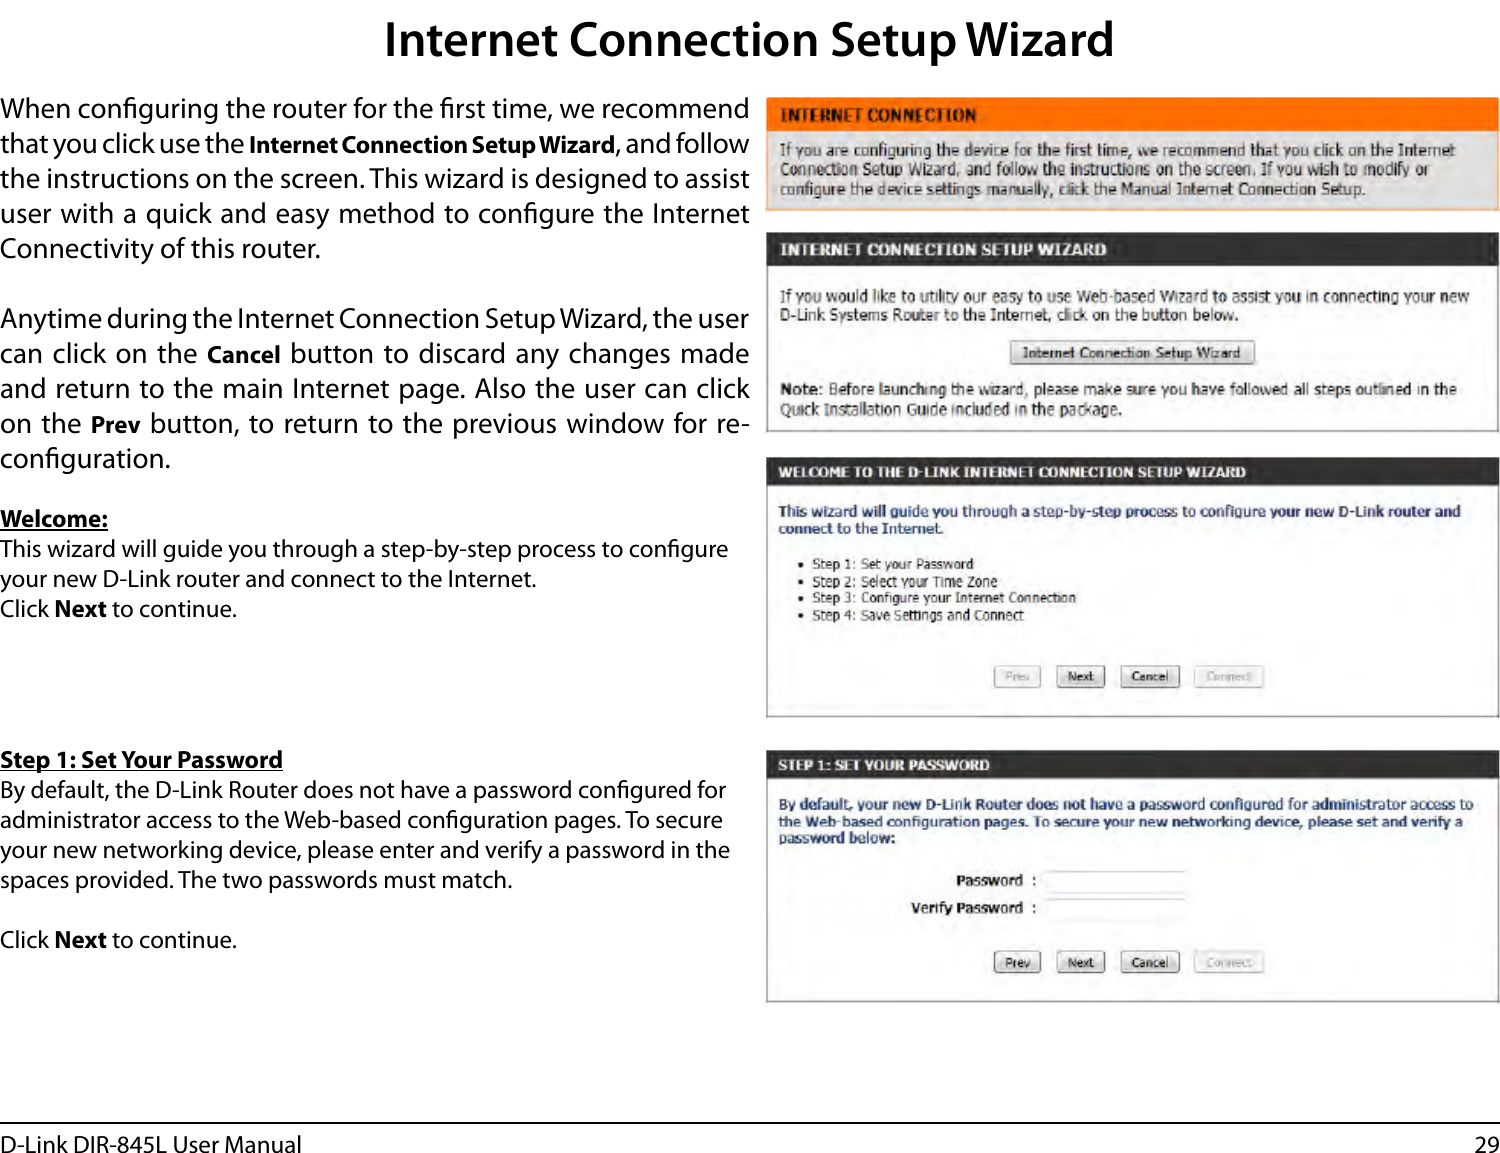 29D-Link DIR-845L User ManualInternet Connection Setup WizardWhen conguring the router for the rst time, we recommend that you click use the Internet Connection Setup Wizard, and follow the instructions on the screen. This wizard is designed to assist user with a quick and easy method to congure the Internet Connectivity of this router.Anytime during the Internet Connection Setup Wizard, the user can click on the  Cancel button to discard any changes made and return to the main Internet page. Also the user can click on the Prev button, to return to the previous window for re-conguration.Welcome:This wizard will guide you through a step-by-step process to congure your new D-Link router and connect to the Internet. Click Next to continue.Step 1: Set Your PasswordBy default, the D-Link Router does not have a password congured for administrator access to the Web-based conguration pages. To secure your new networking device, please enter and verify a password in the spaces provided. The two passwords must match.Click Next to continue.